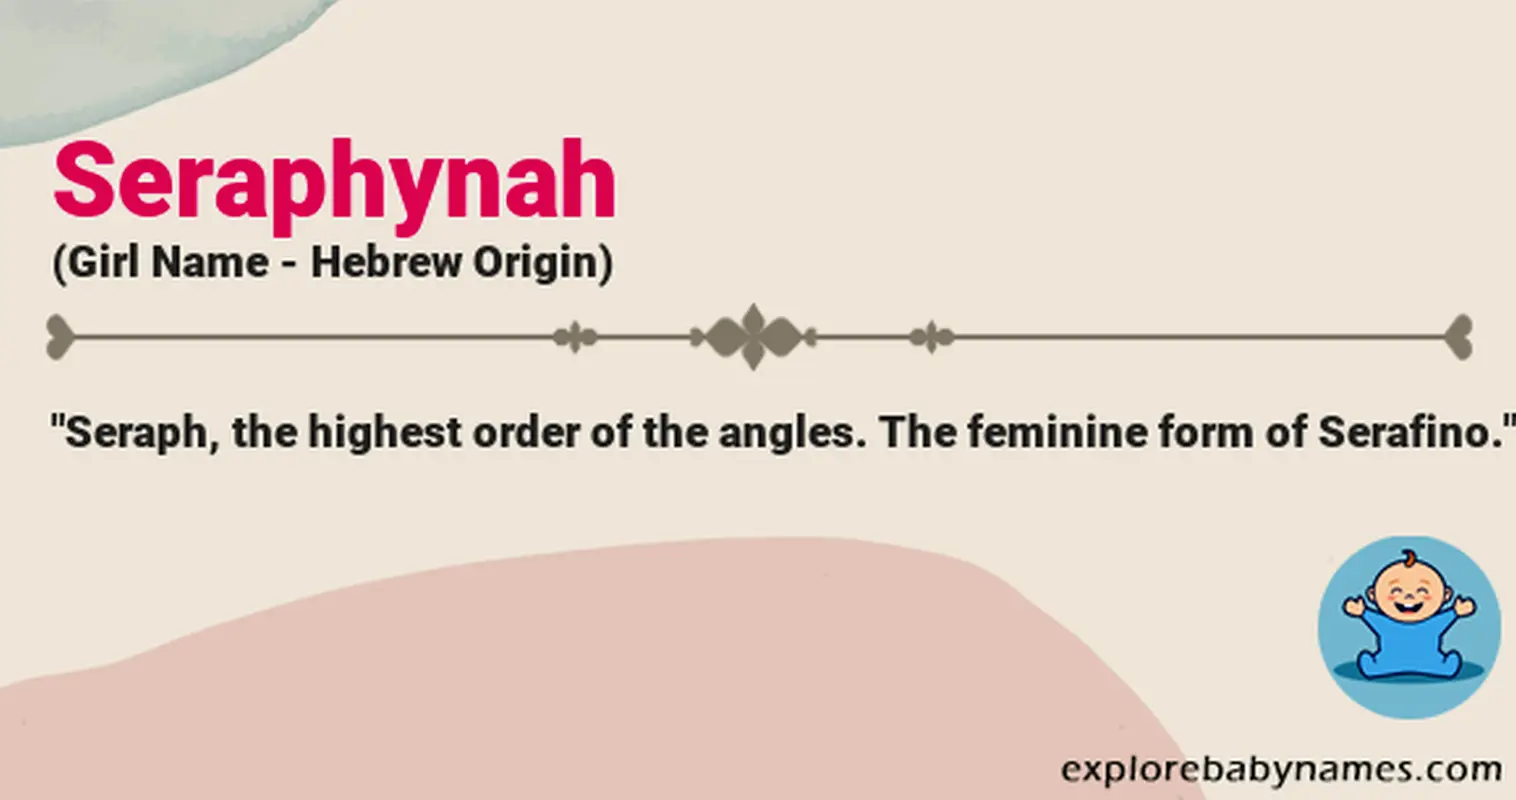 Meaning of Seraphynah